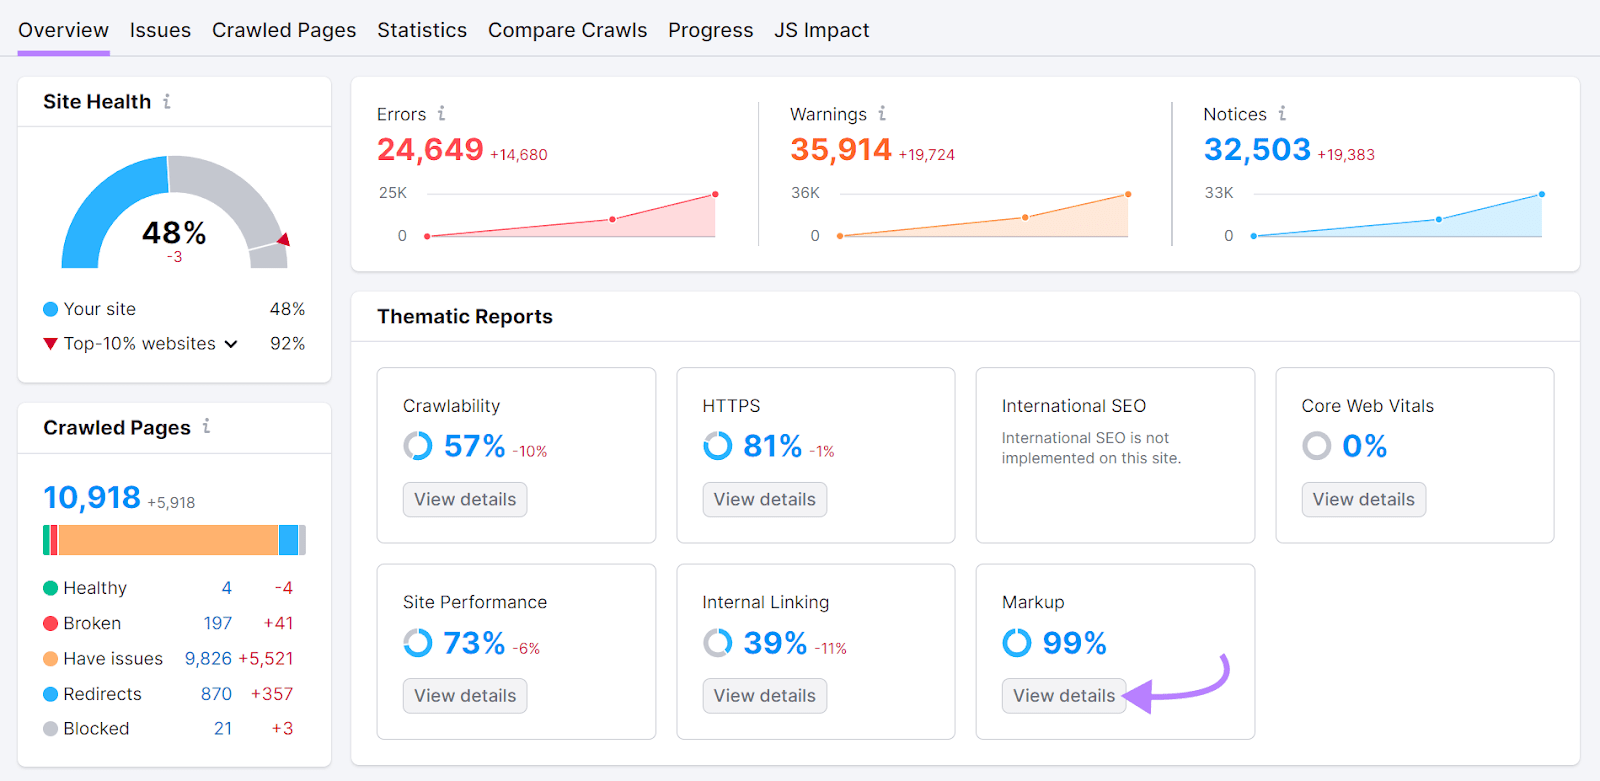 Markup widget showing 99% in Site Audit's overview dashboard